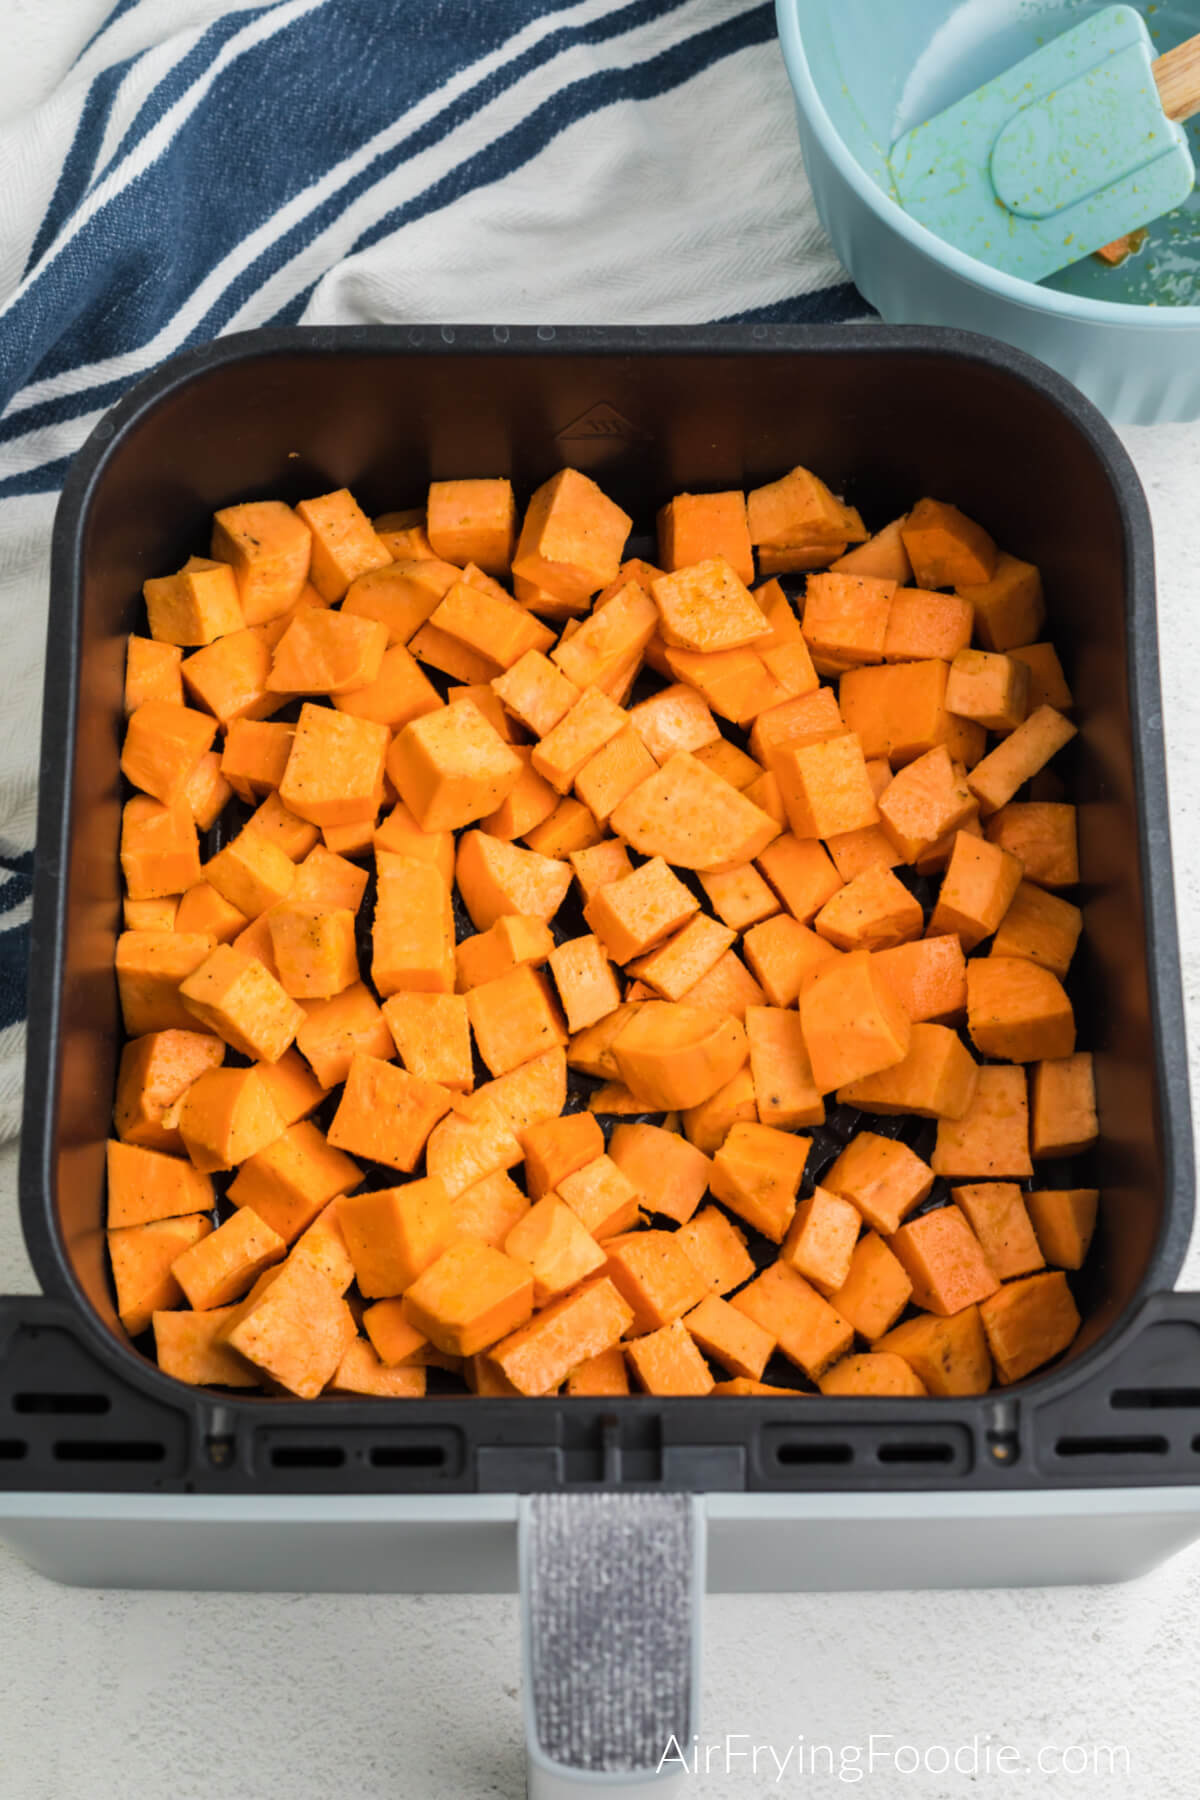 Oiled and seasoned sweet potato cubes in air fryer basket, ready to be cooked.